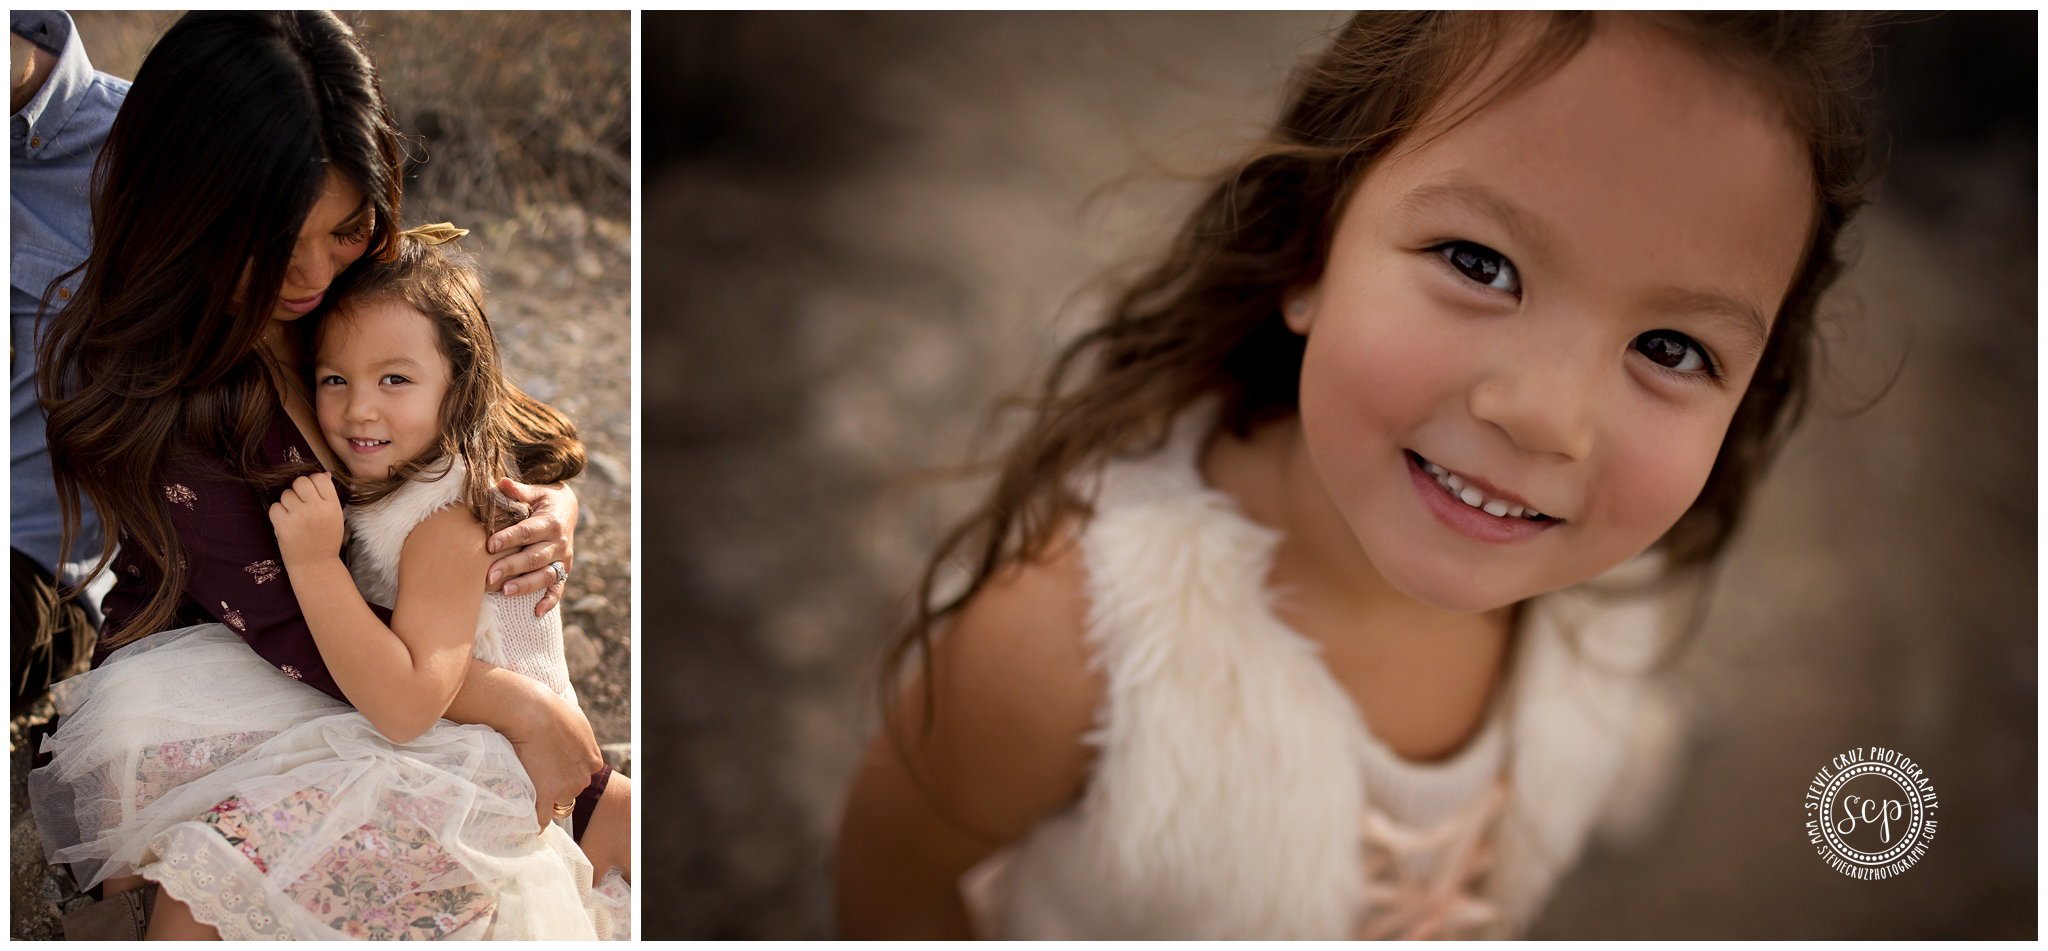 What to wear for family pictures for girls? Photo by Stevie Cruz Photography 